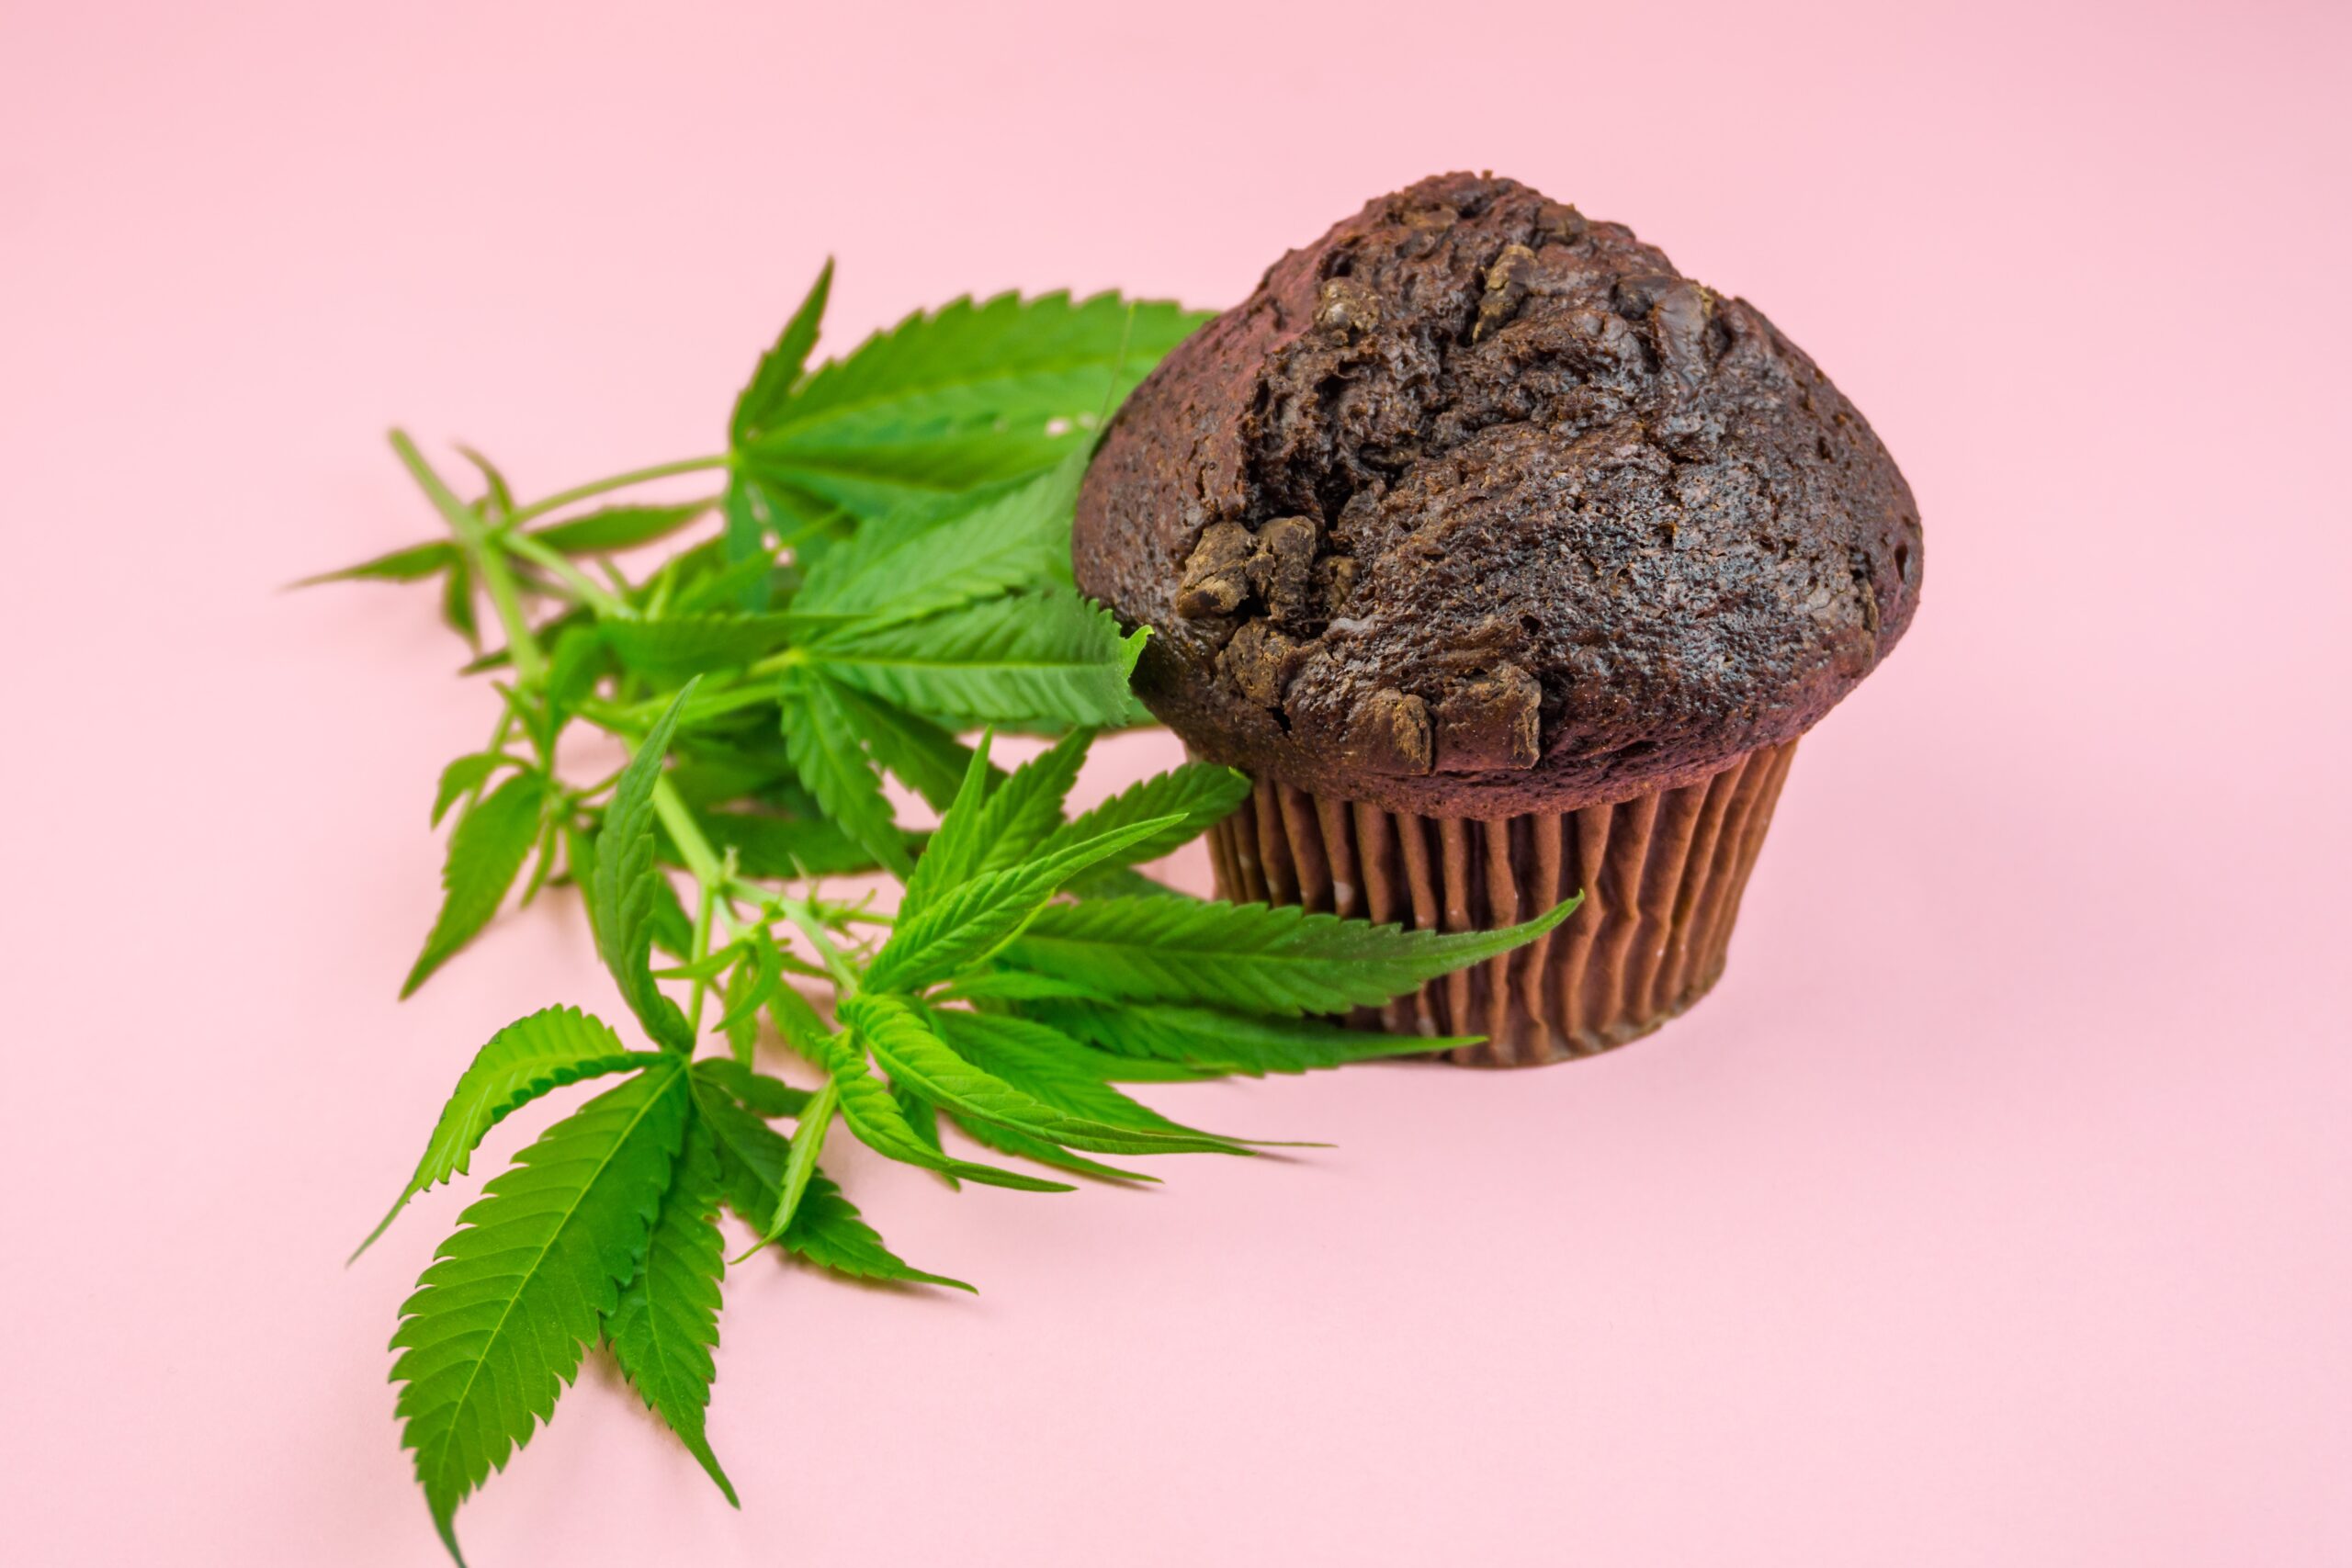 cannabis chocolate muffins infused with cbd or thc 2022 11 15 11 08 18 utc scaled